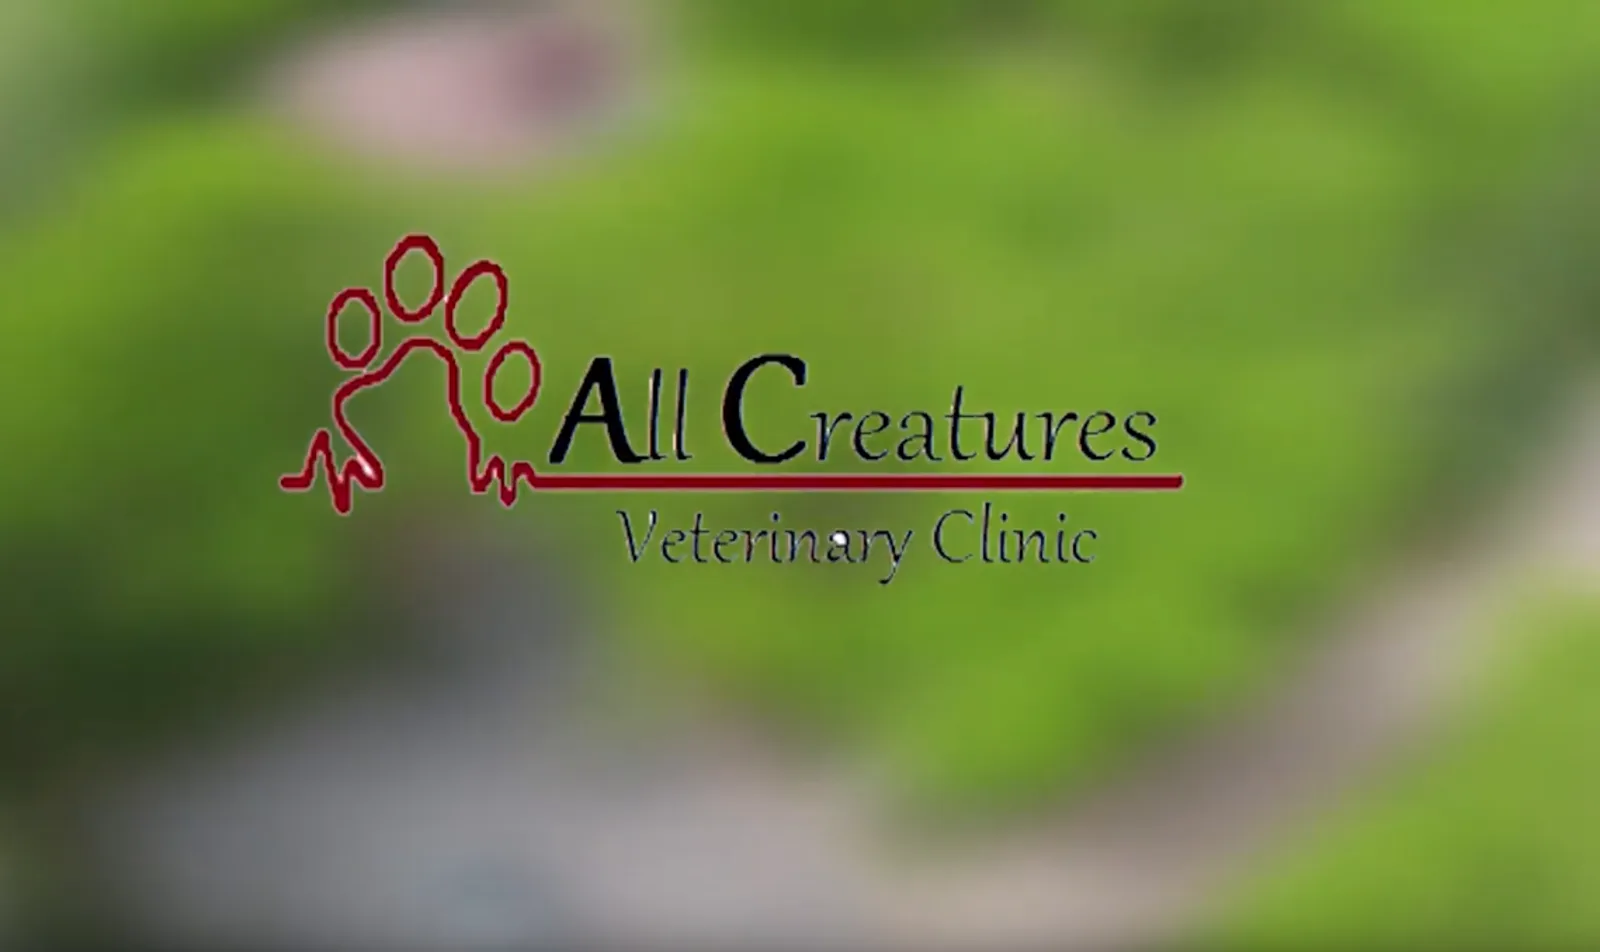 Video Thumbnail for All Creatures Veterinary Clinic showing the logo over some greenery